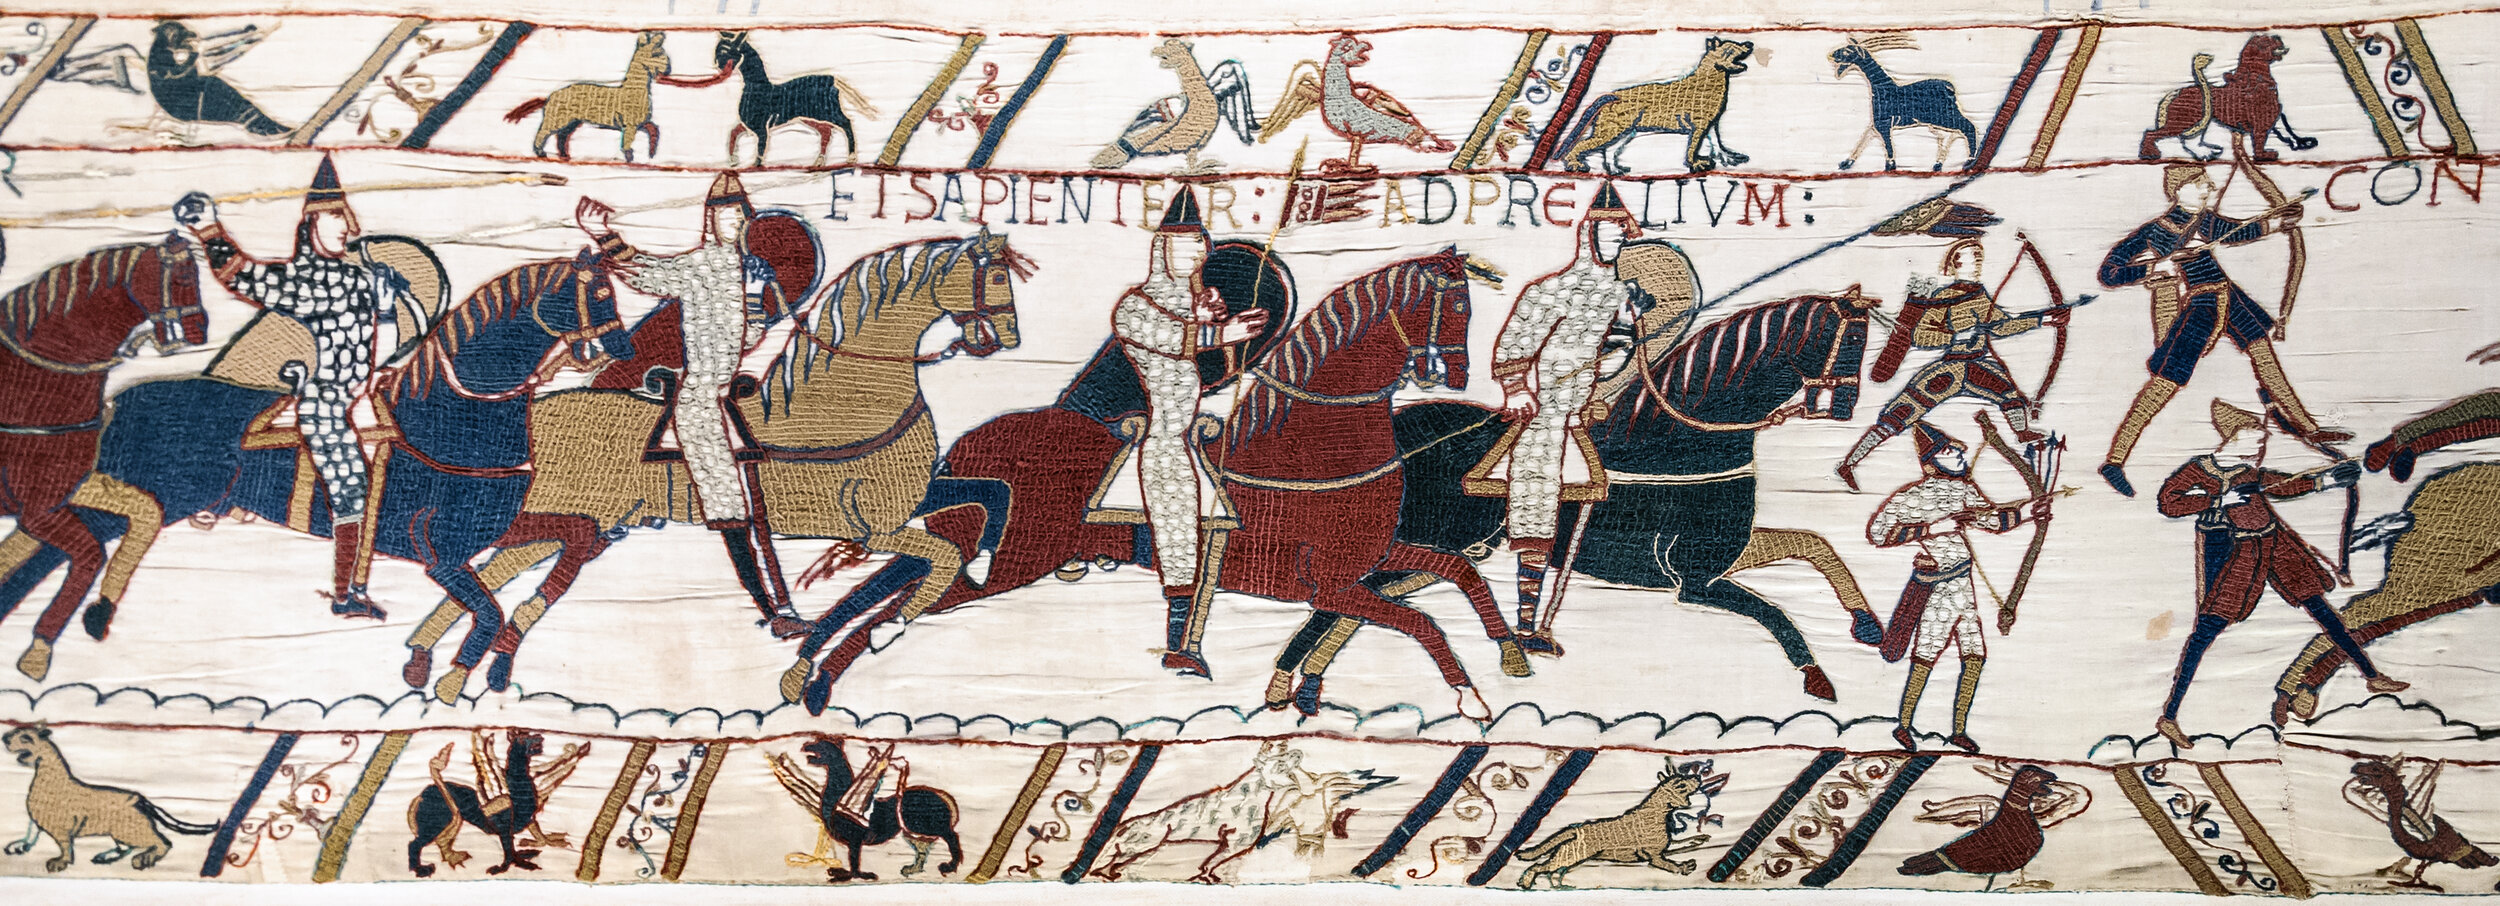 Bayeux_Tapestry_scene51_Battle_of_Hastings_Norman_knights_and_archers.jpg